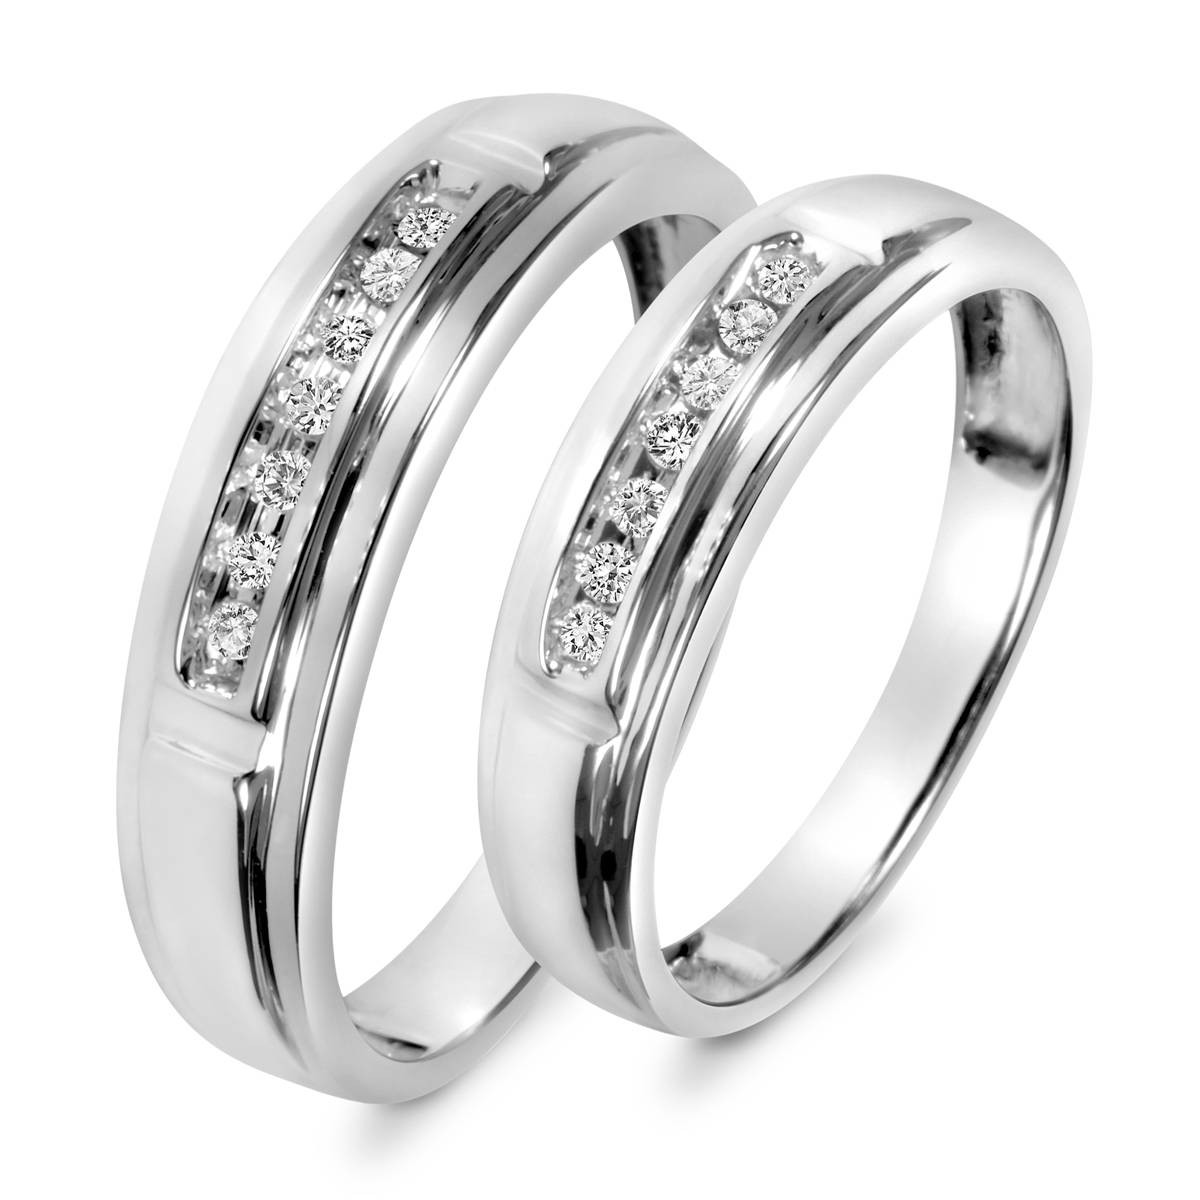 Cheap Wedding Band Sets His And Hers
 15 Inspirations of Cheap Wedding Bands Sets His And Hers